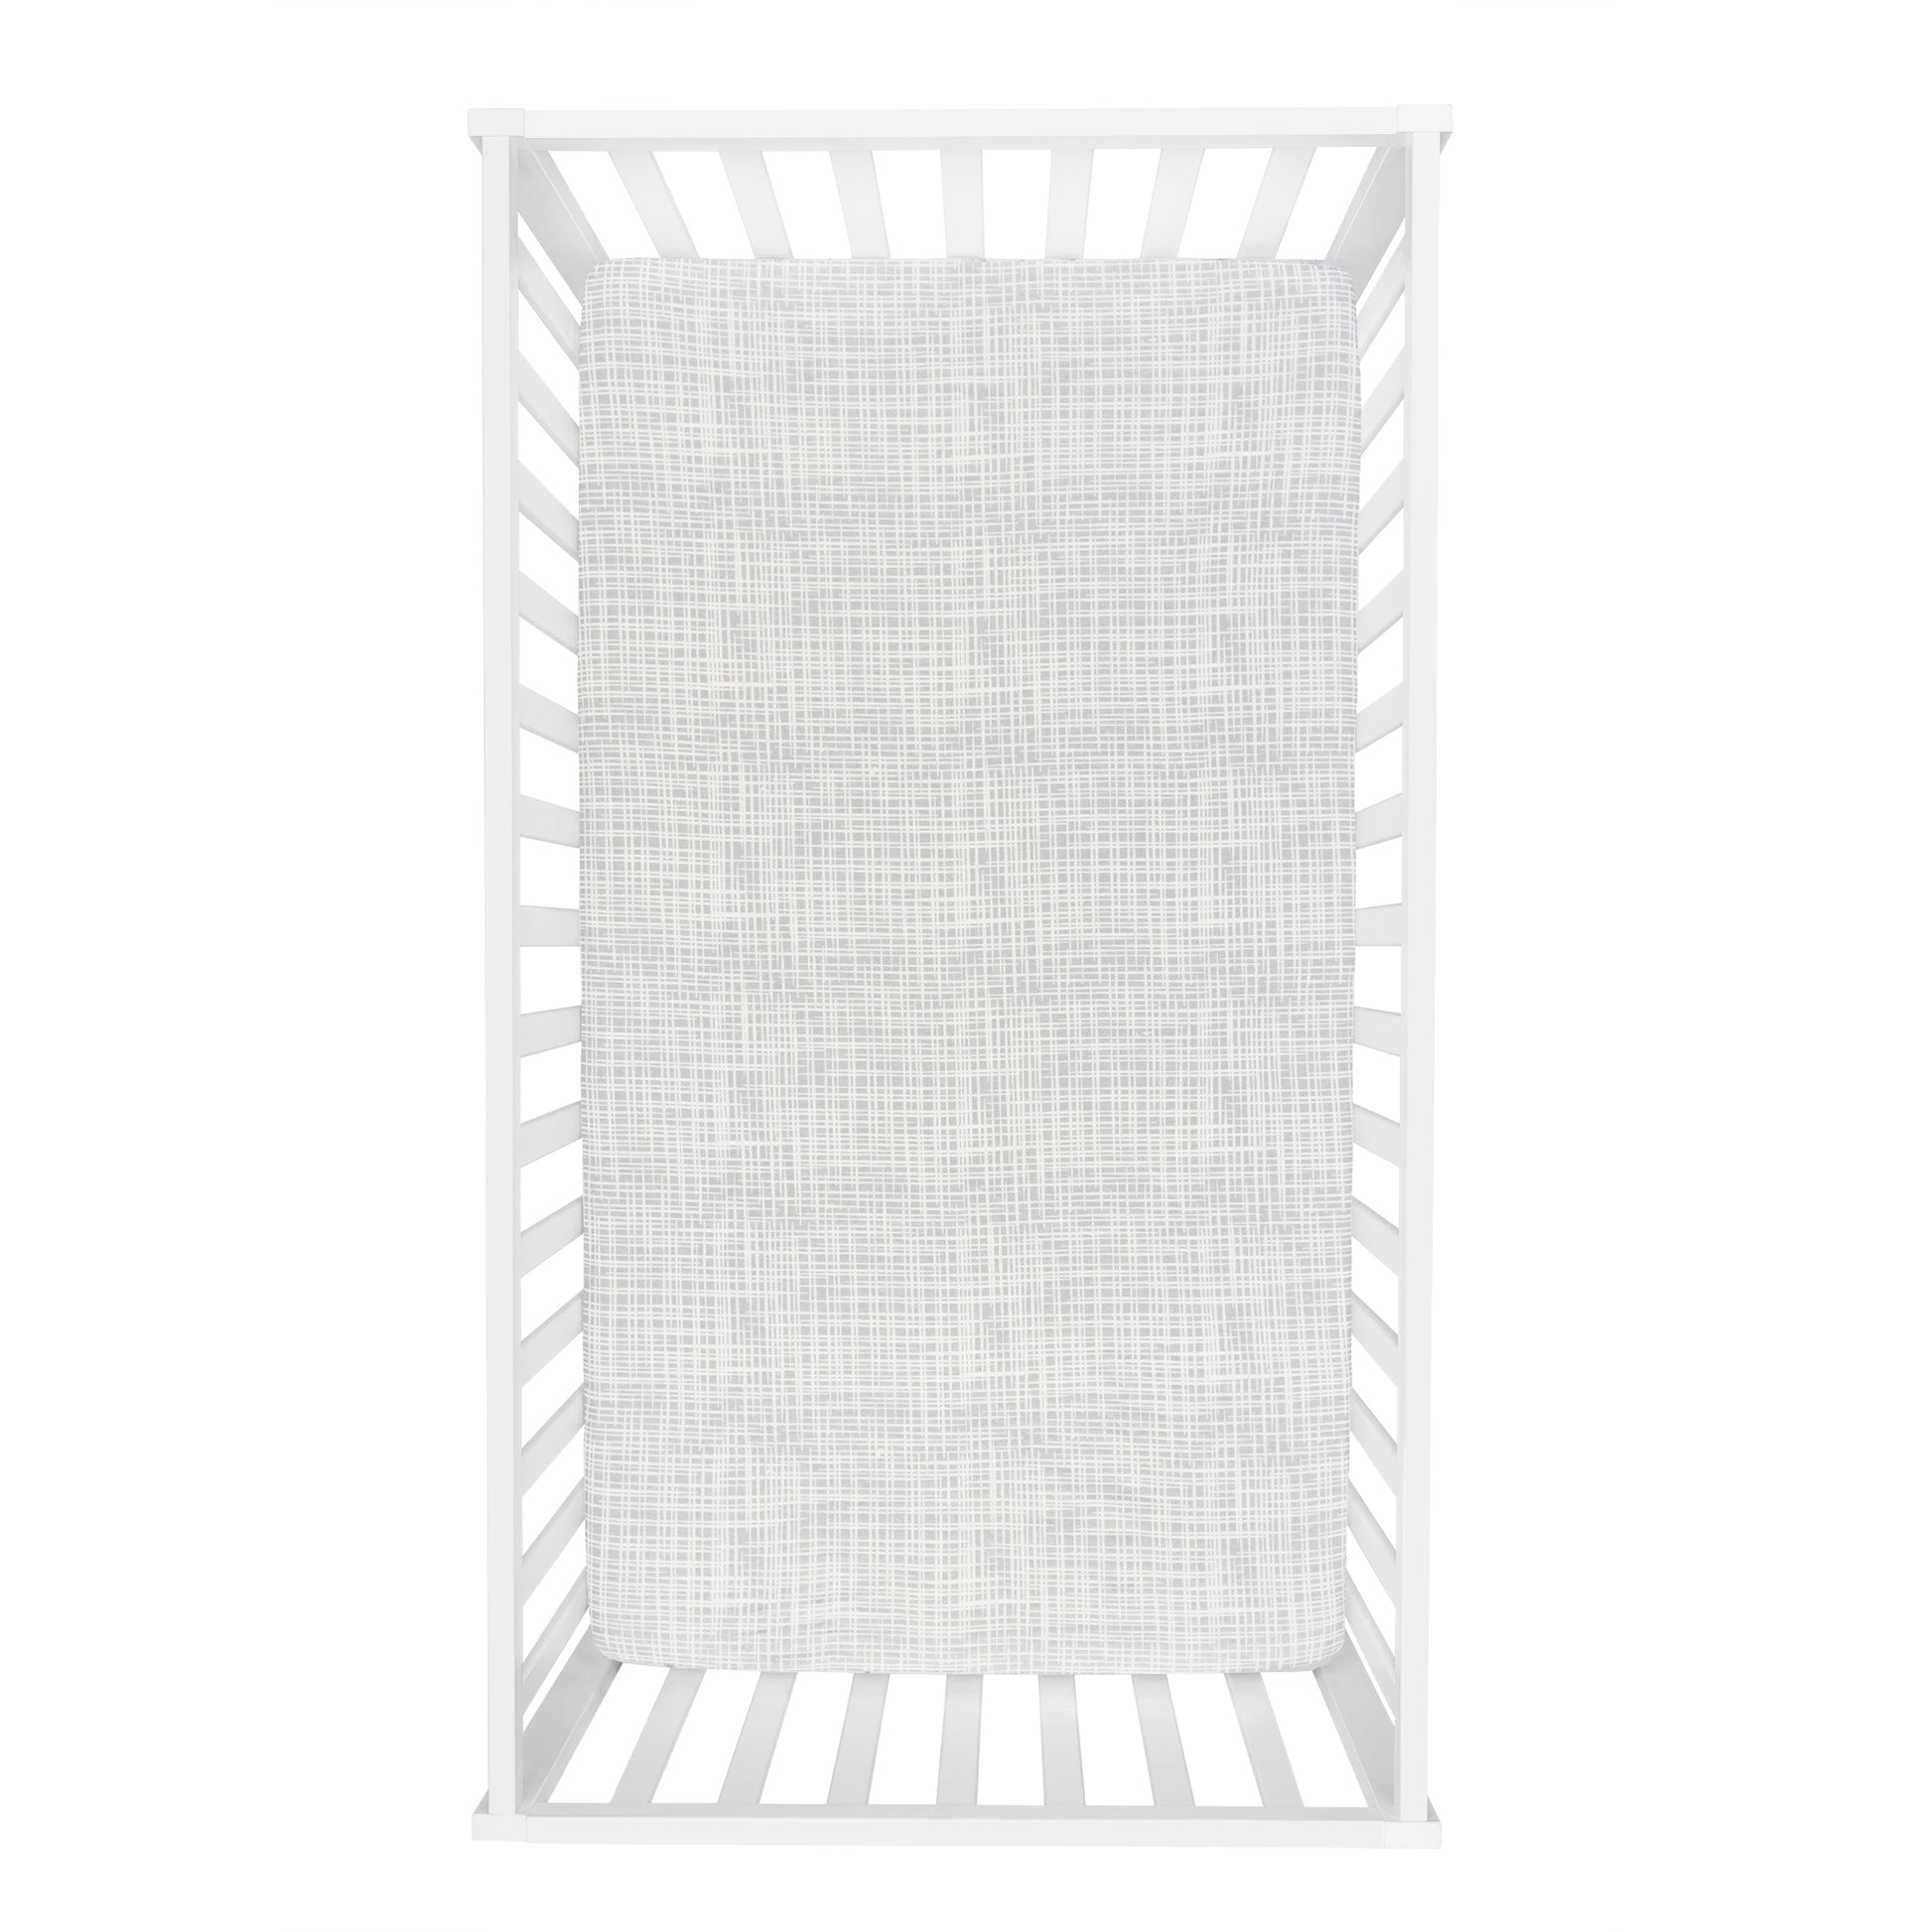  Criss Cross Deluxe Flannel Fitted Crib Sheet - overhead view